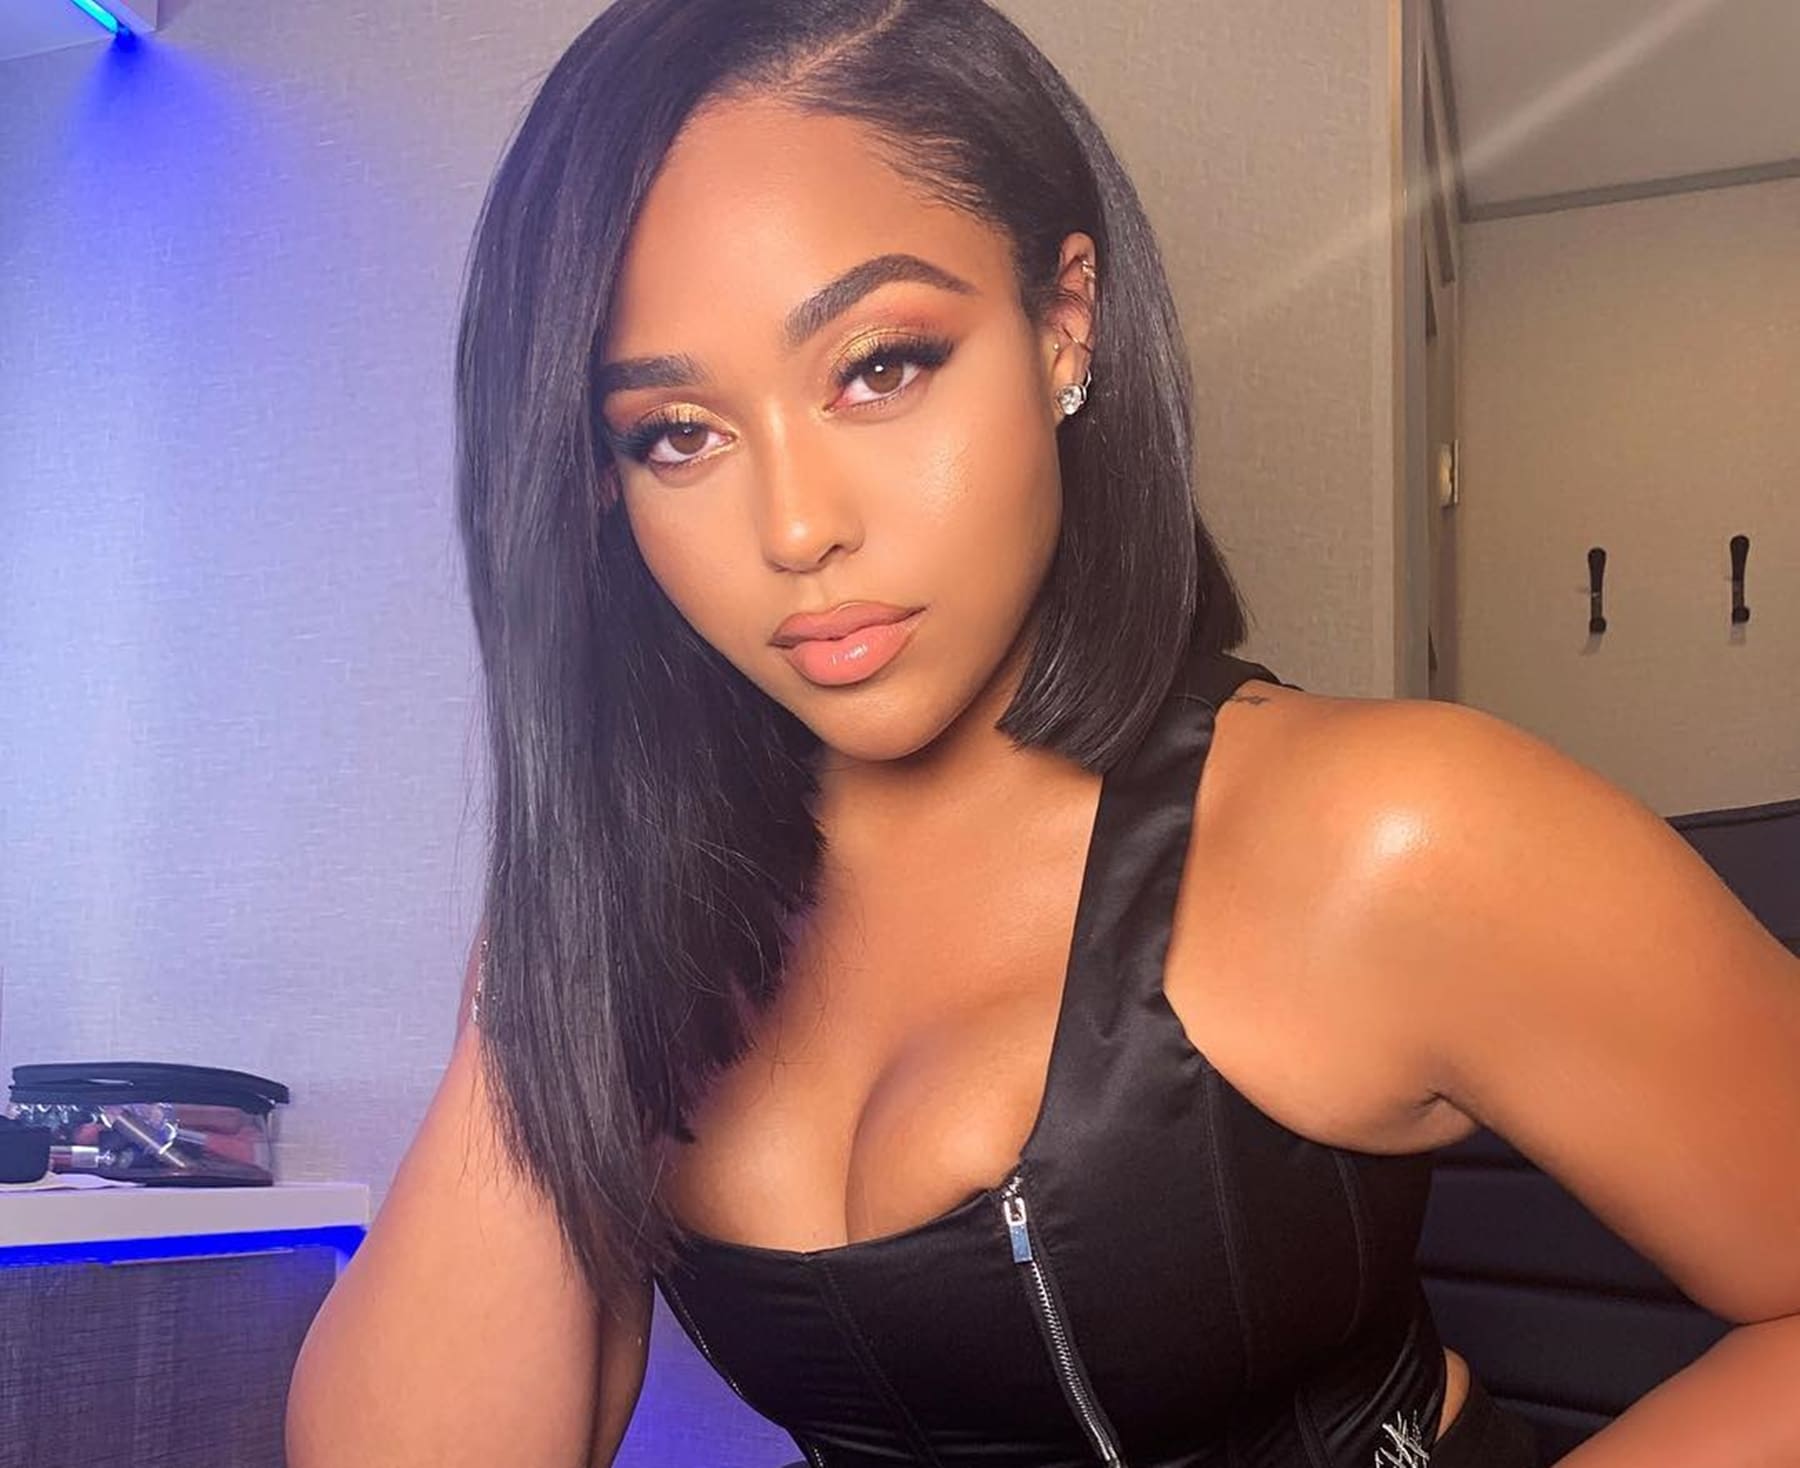 ”jordyn-woods-latest-video-featuring-her-bf-will-make-your-day-check-out-the-video”